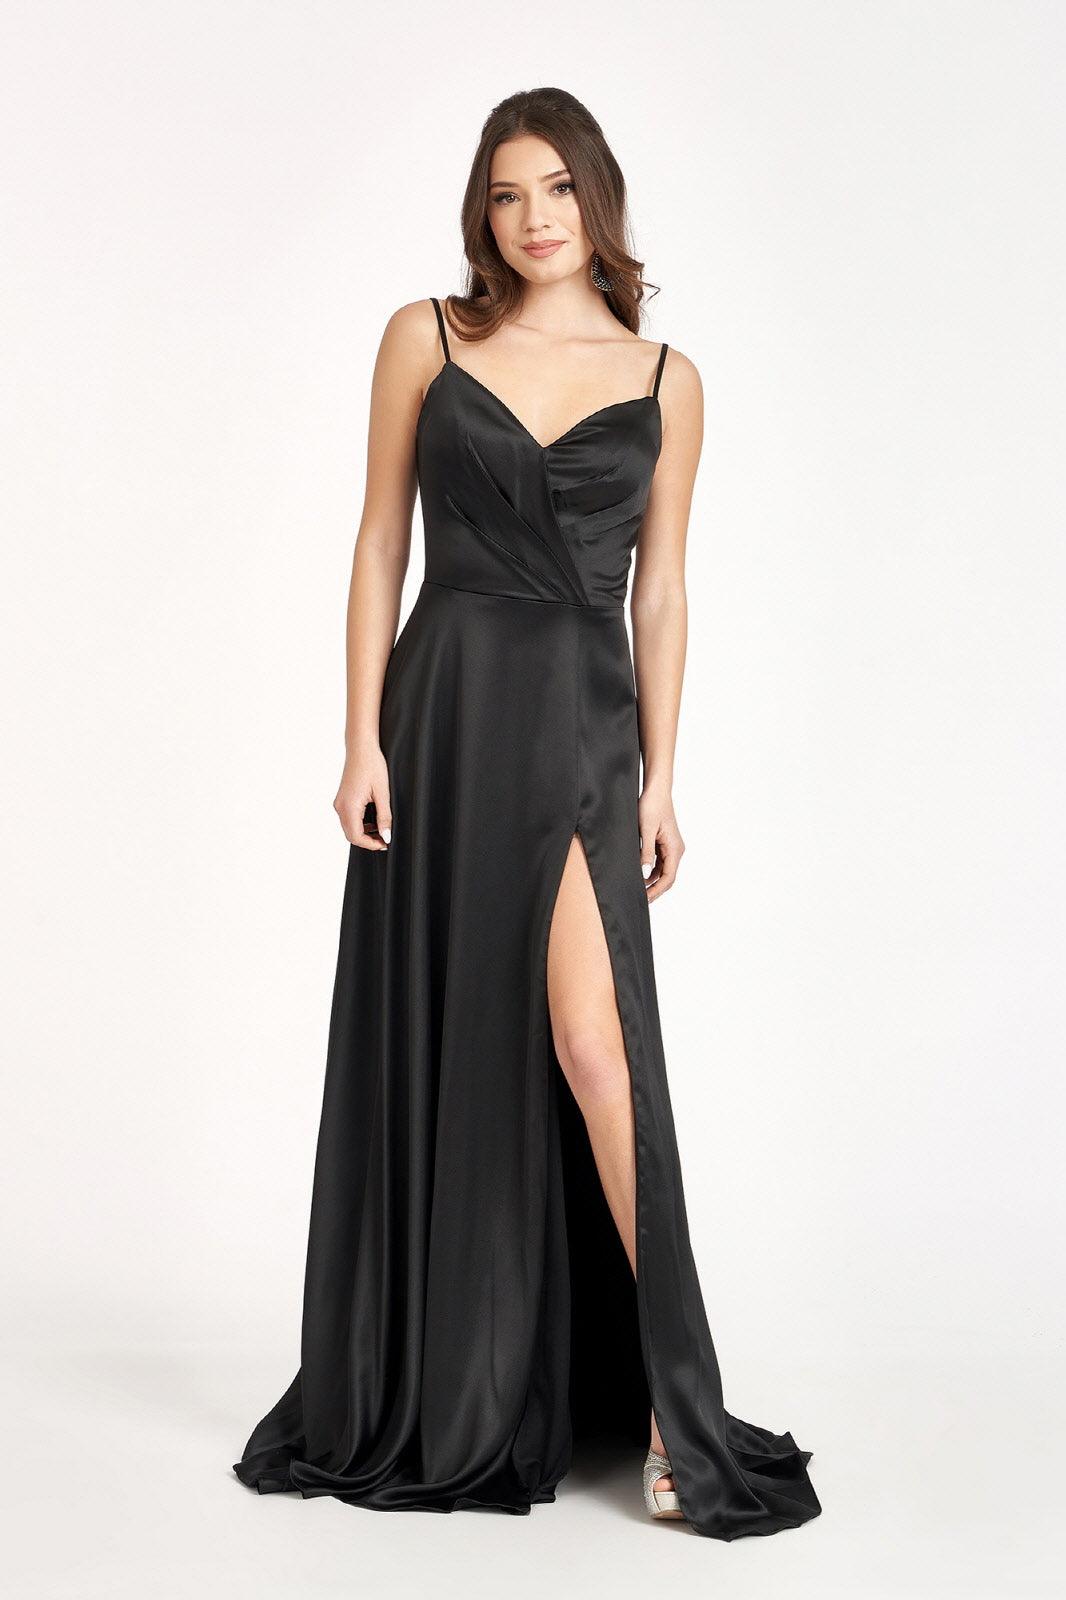 Long Spaghetti Strap Bridesmaid Dress - The Dress Outlet